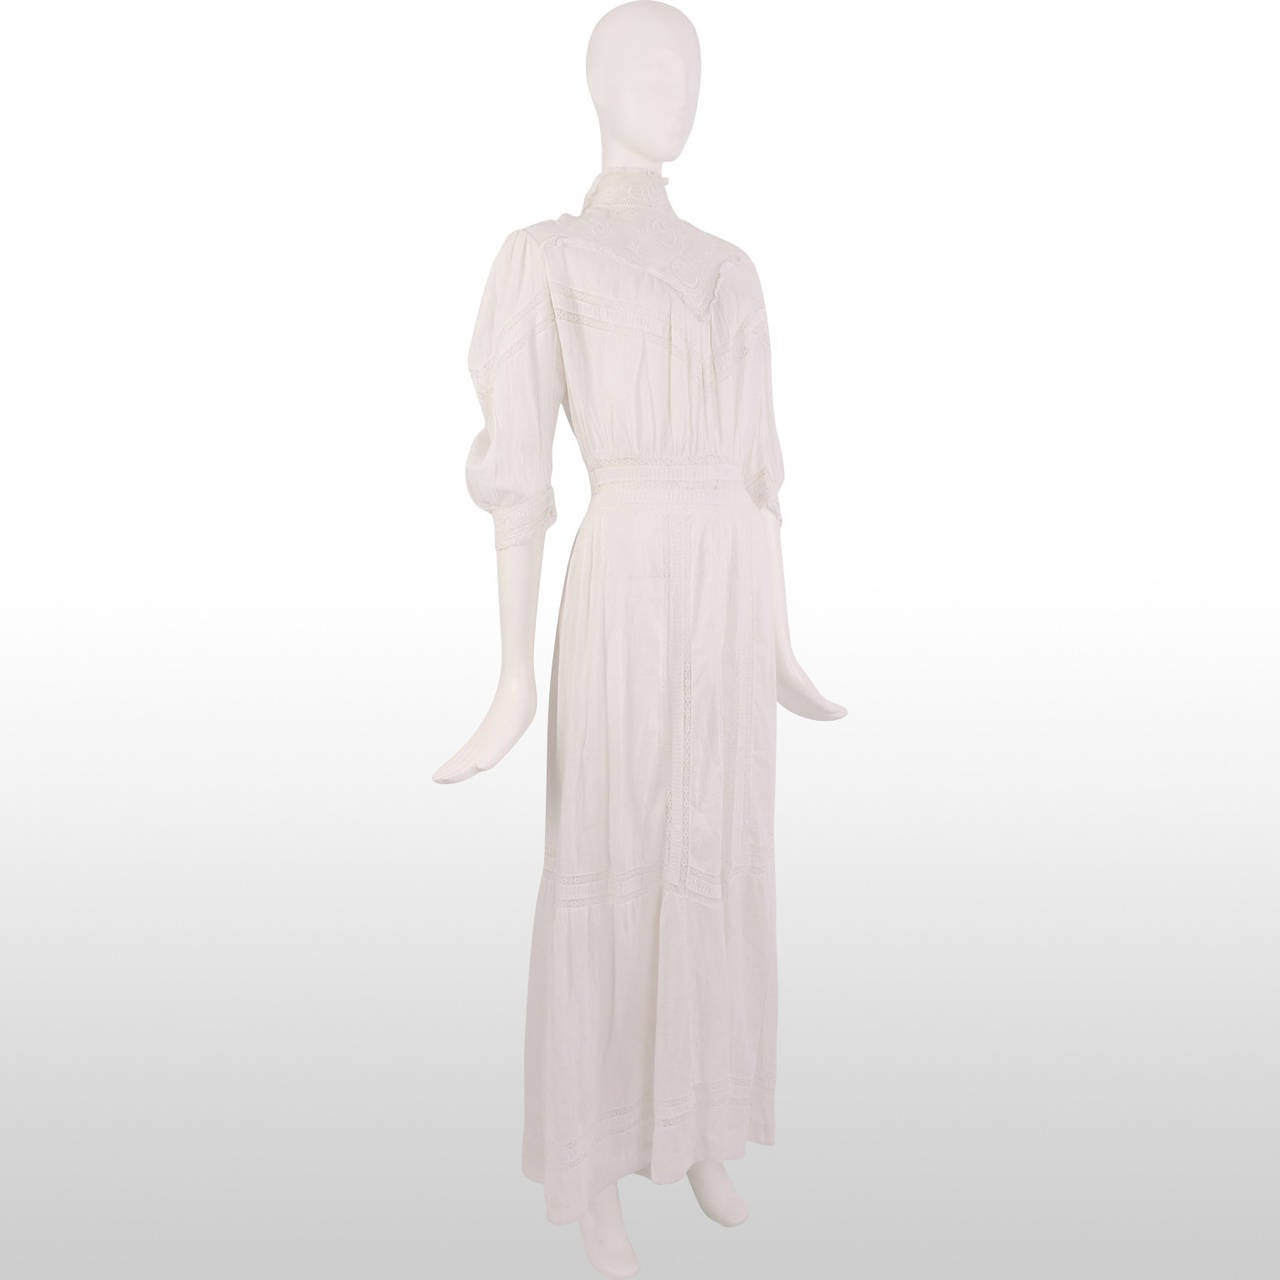 Women's Victorian White Embroidery and Lace High Neck Lawn Dress